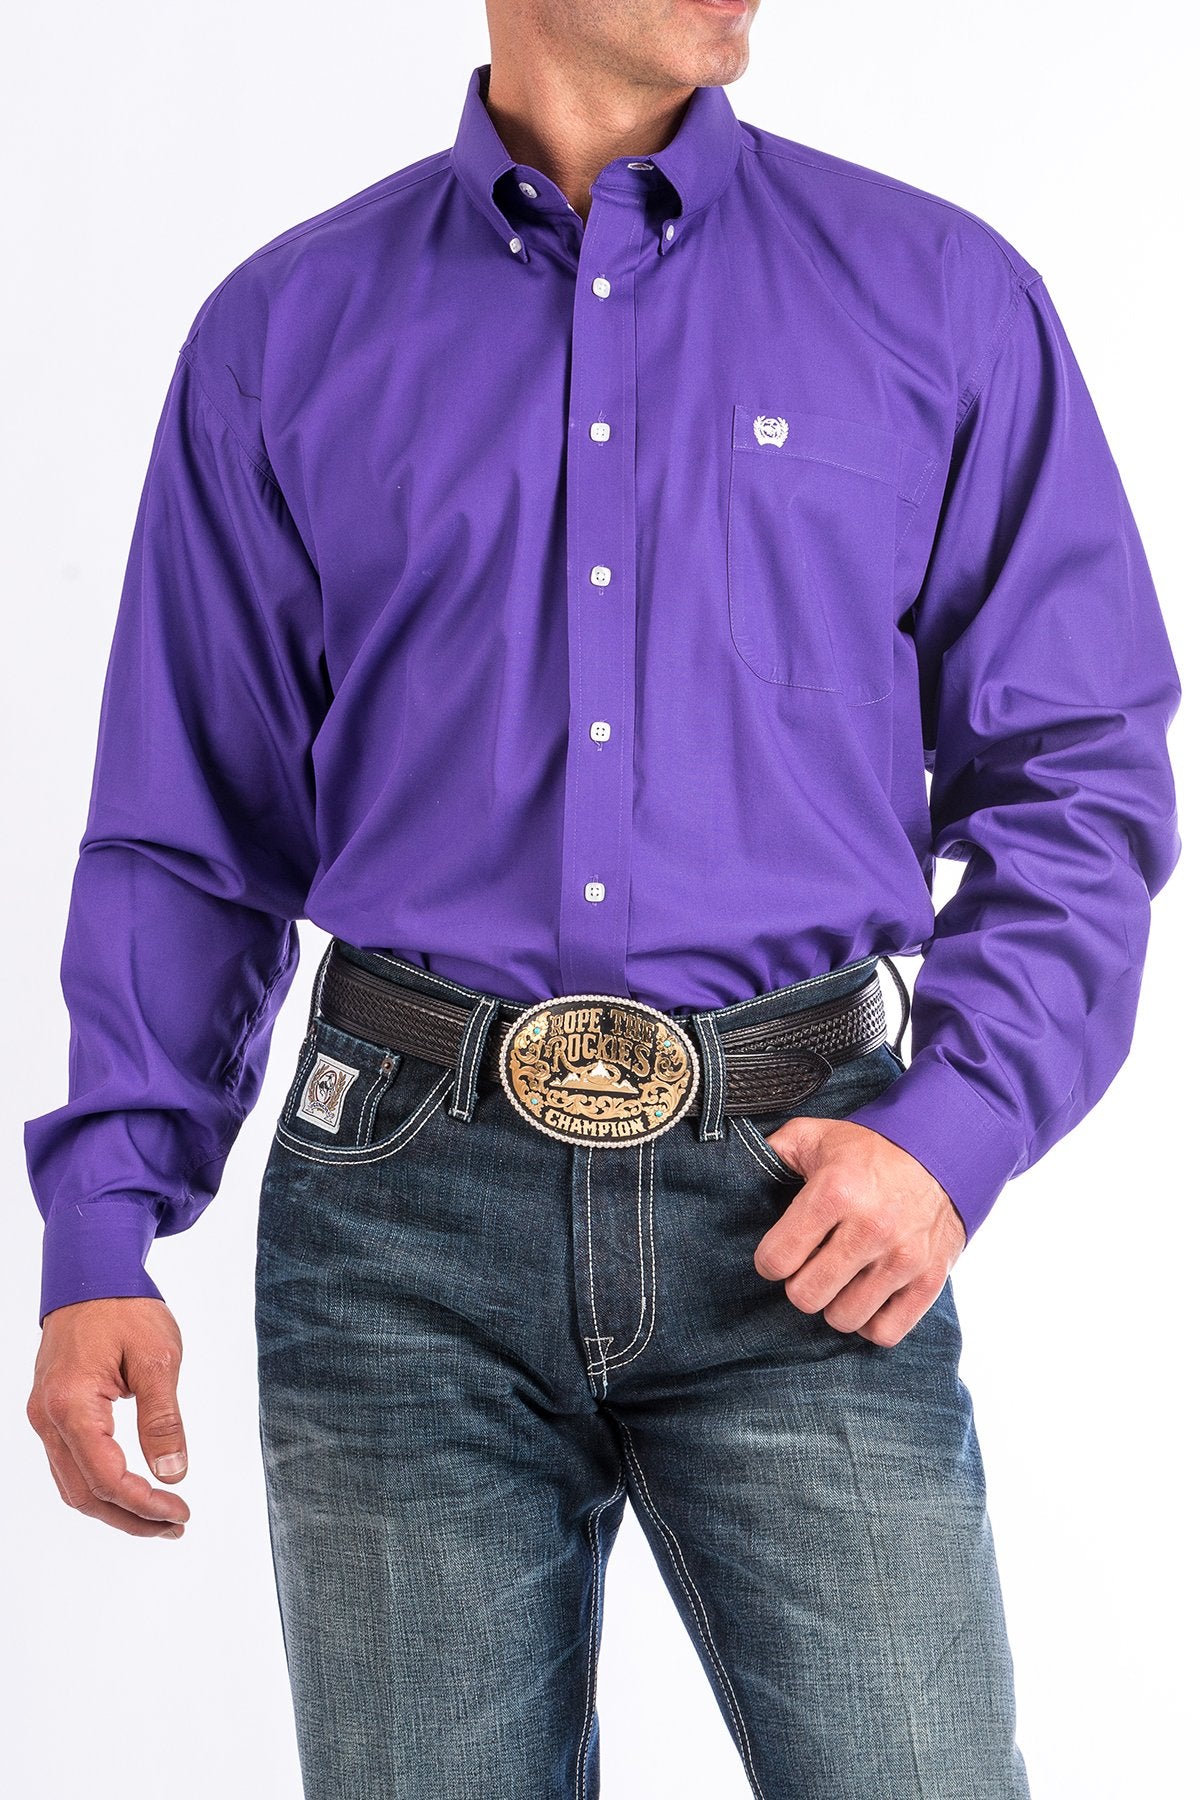 Buy Cinch Solid Purple Western Button Down Shirt - The Stable Door